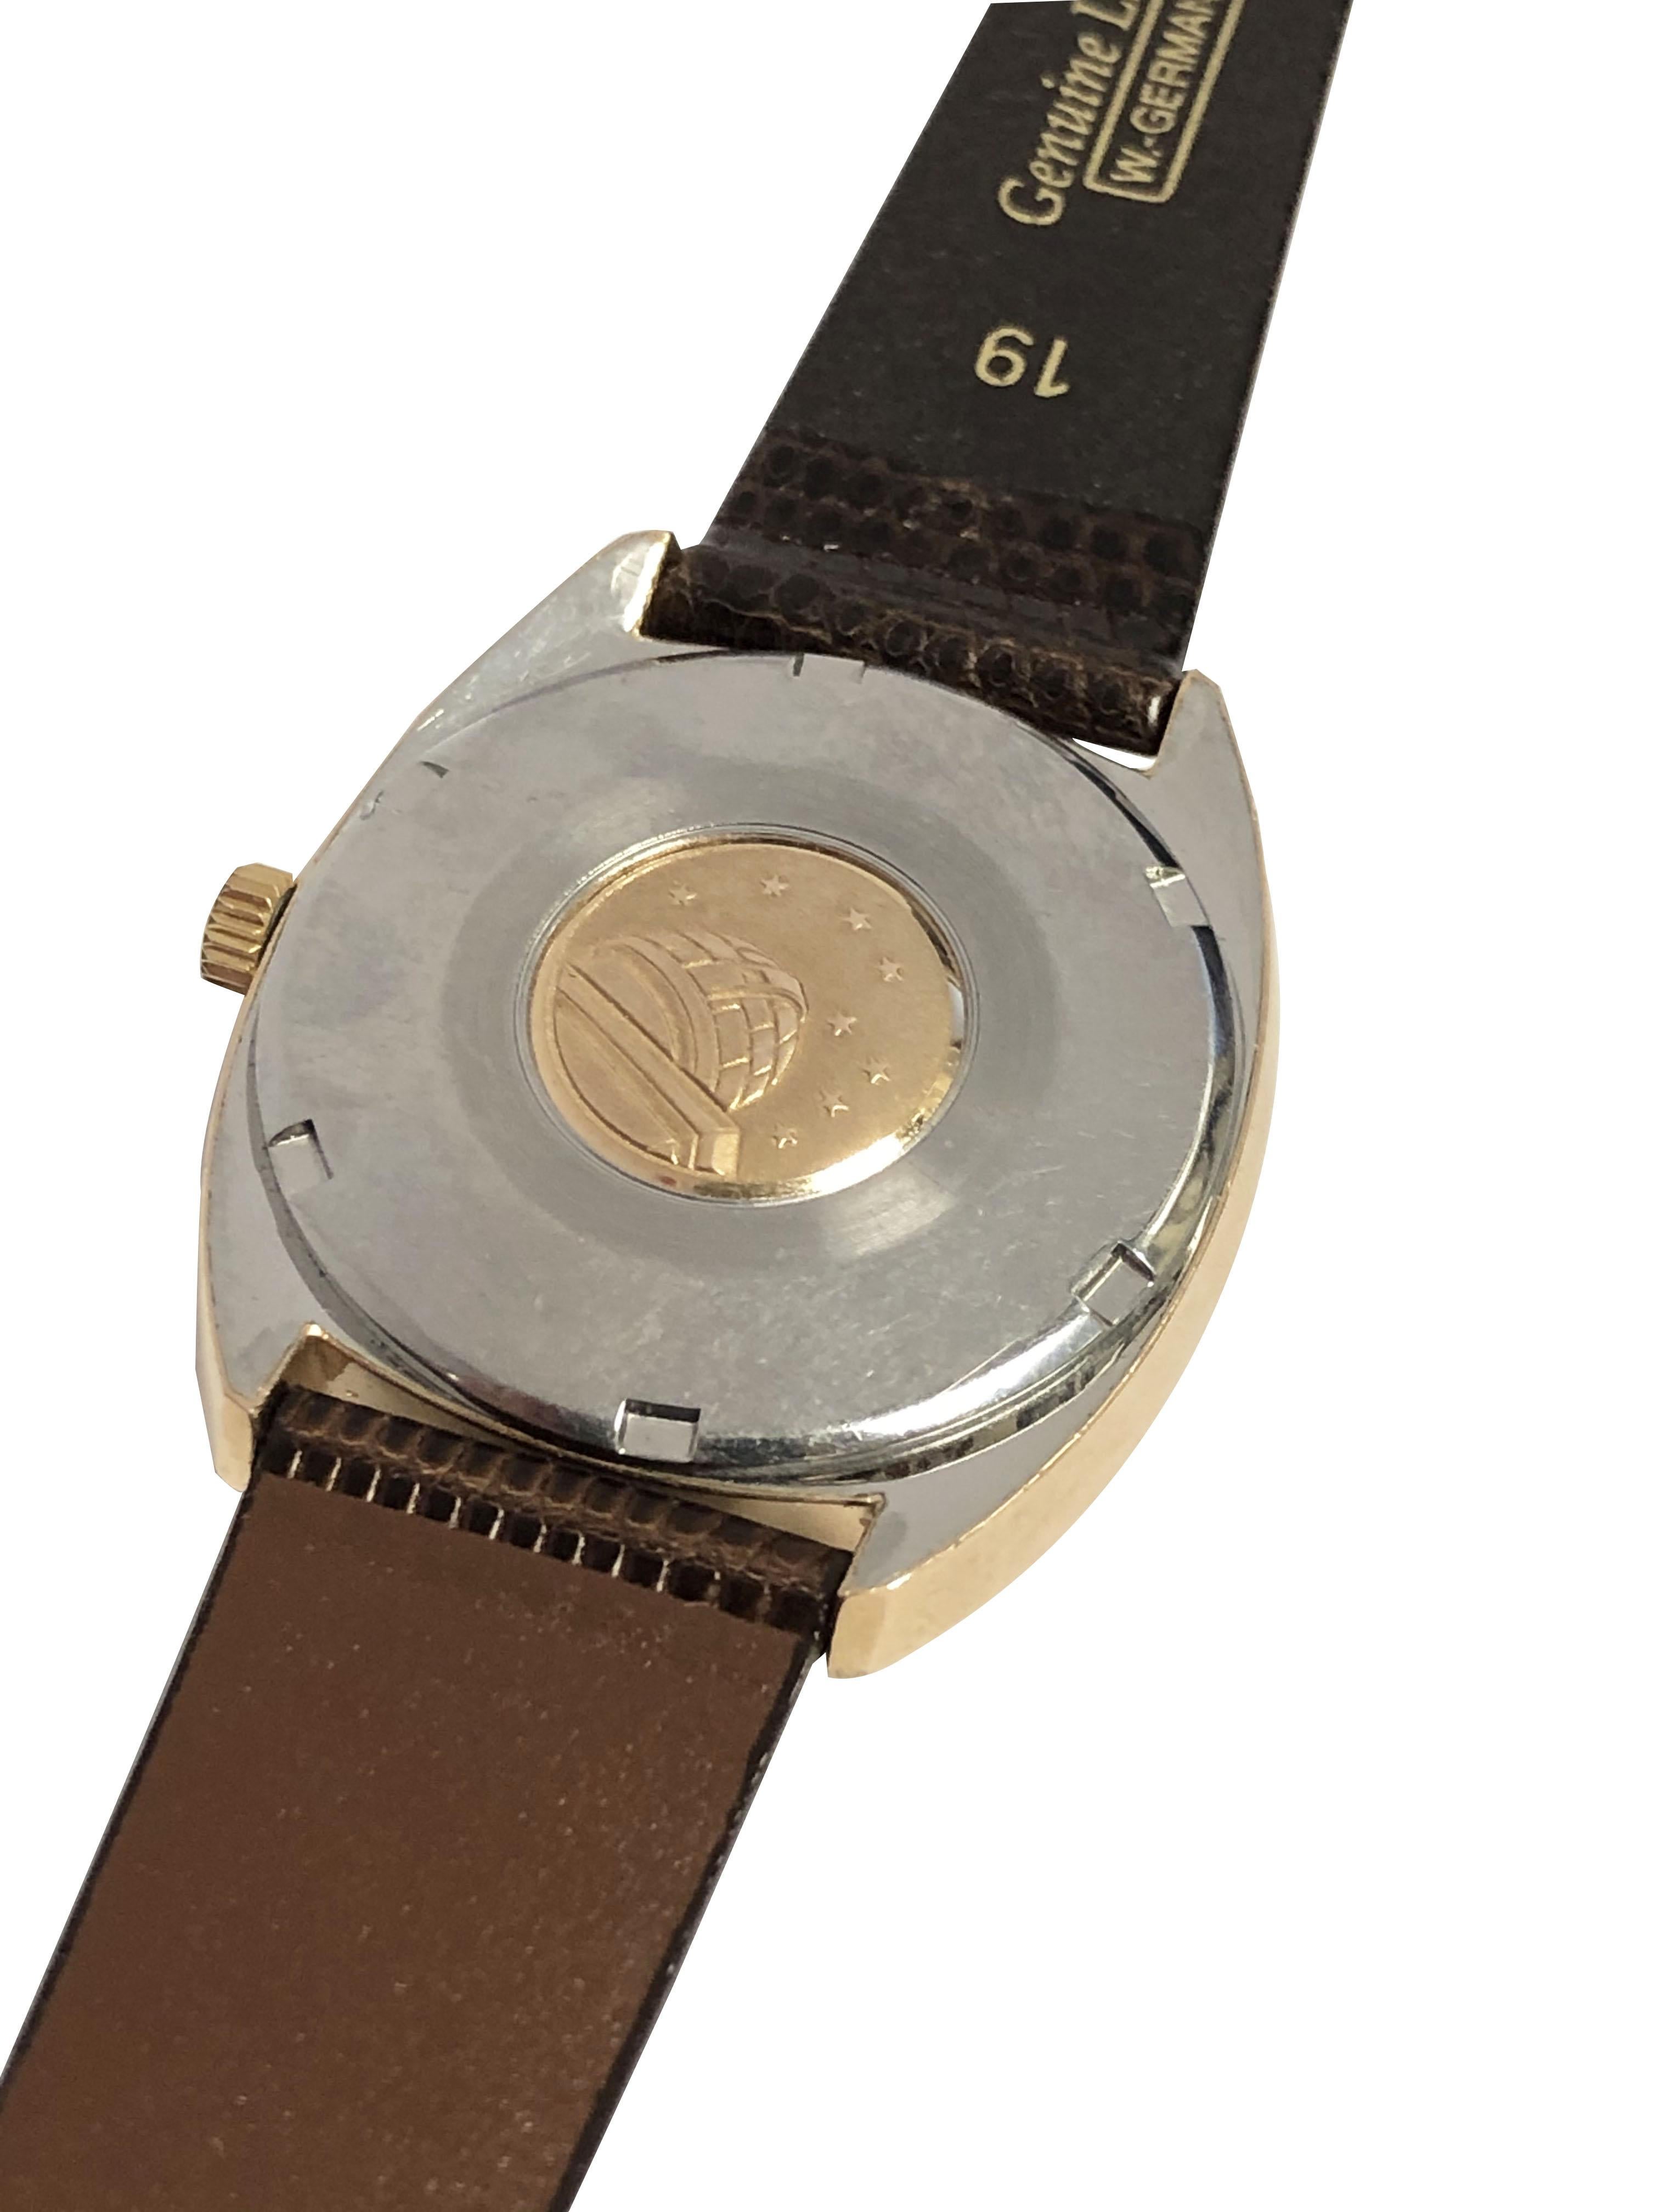 Circa late 1960s Omega Constellation Wrist Watch, 34 M.M. Barrel shape 2 Piece water Proof Rose Gold Shell case with Fluted Bezel and Steel back with Rose Gold Observatory emblem. Automatic self winding movement, Original, Excellent, Mint condition